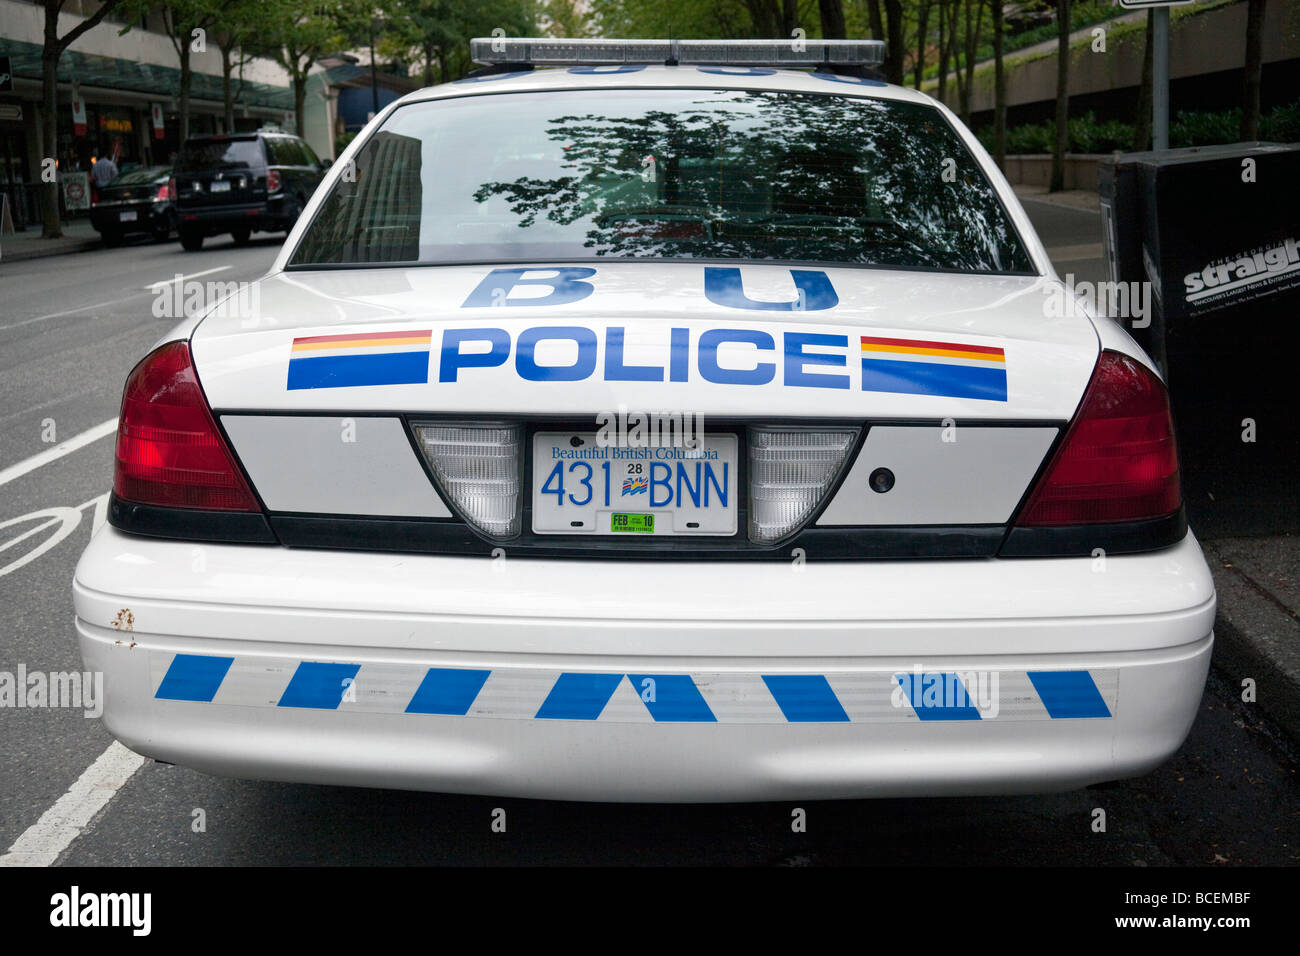 rear of police car, Vancouver, British Columbia, Canada Stock Photo